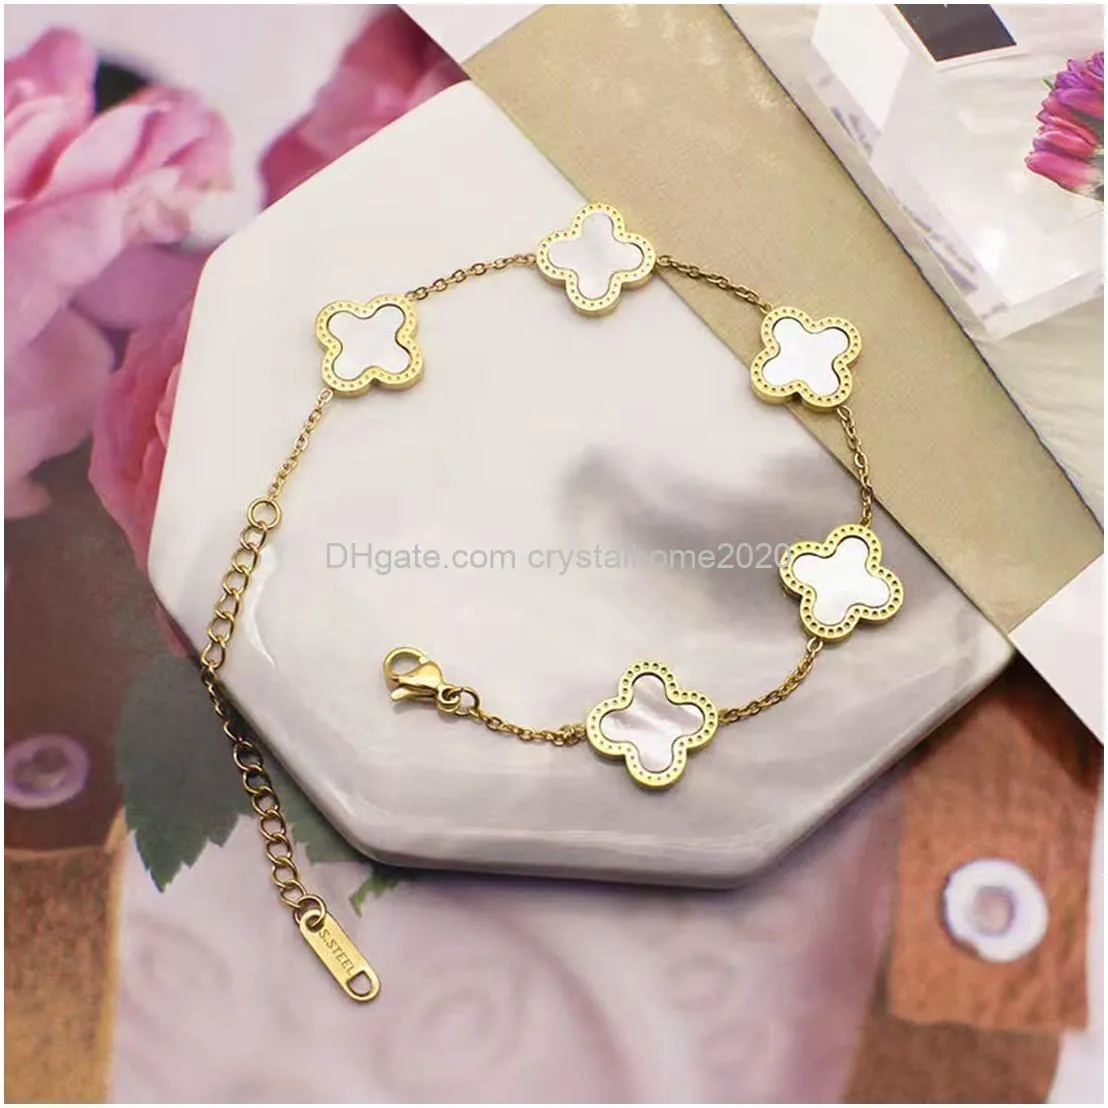 18k plated gold bracelets fashion for women adjustable charm link cute lucky clover bracelets womens girls gift jewelry